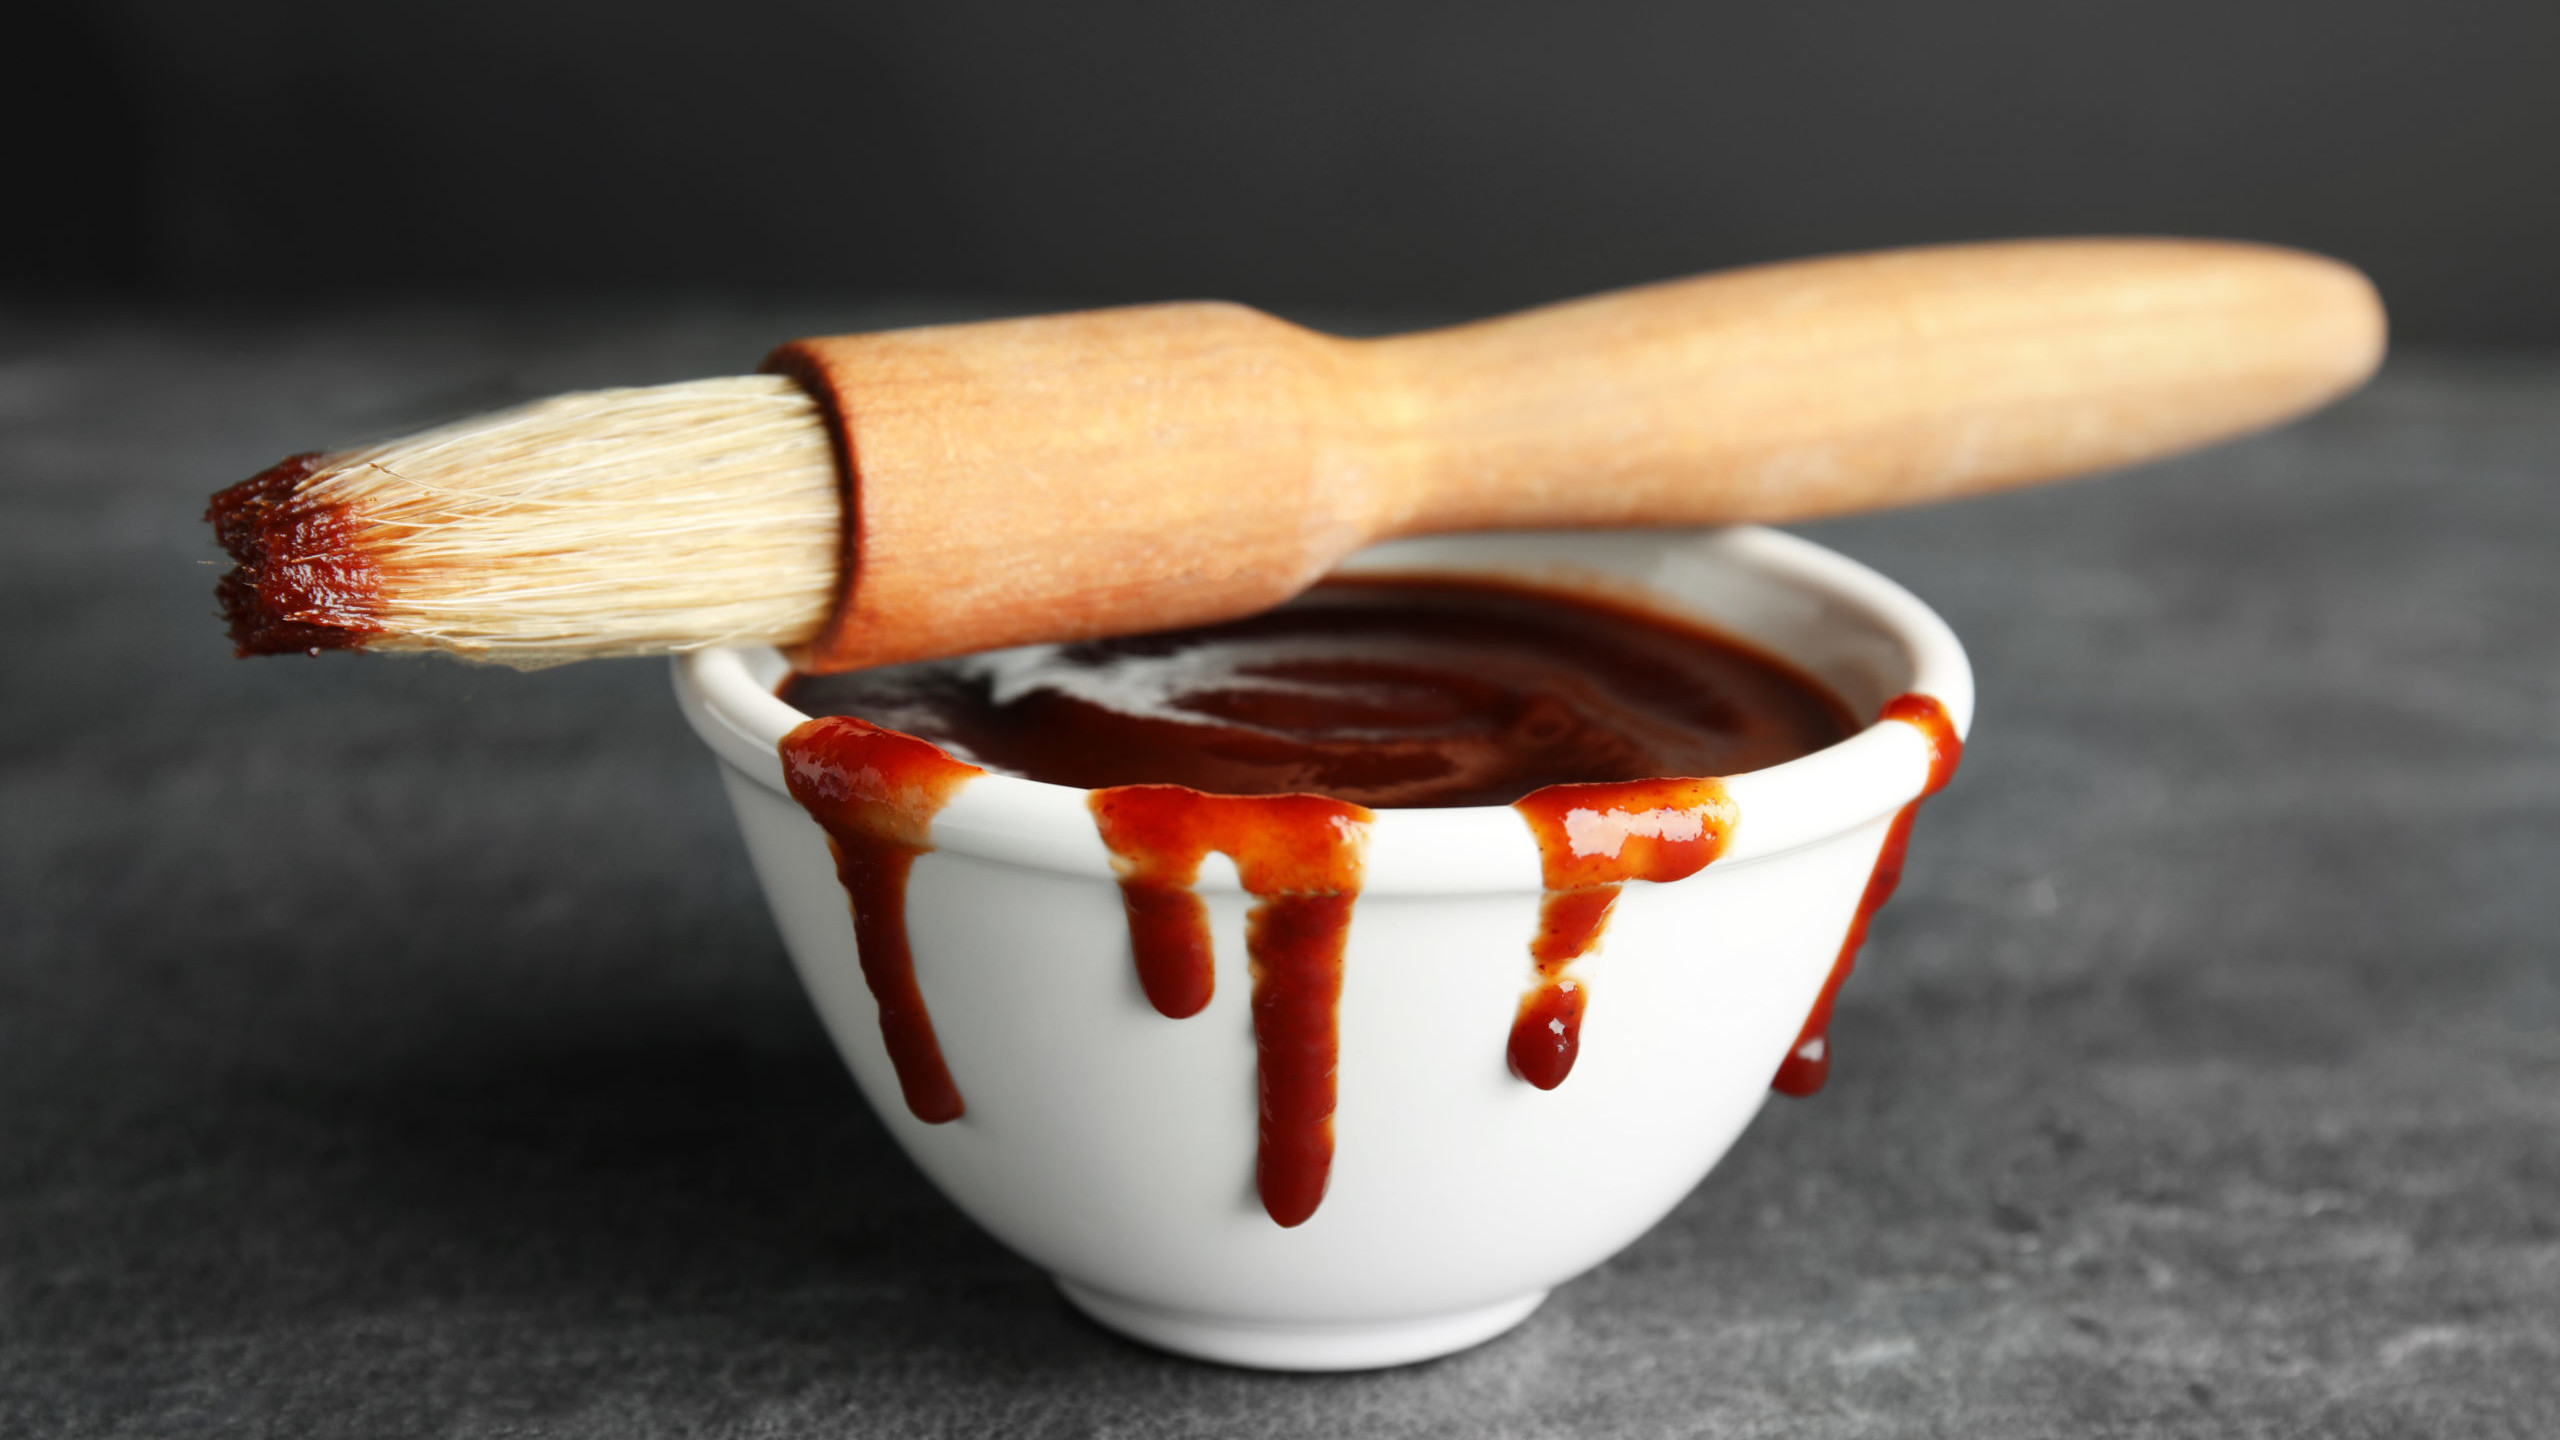 A bowl of cannabis-infused Chocolate Barbecue Sauce featuring Nove Cafe Cappuccino bar